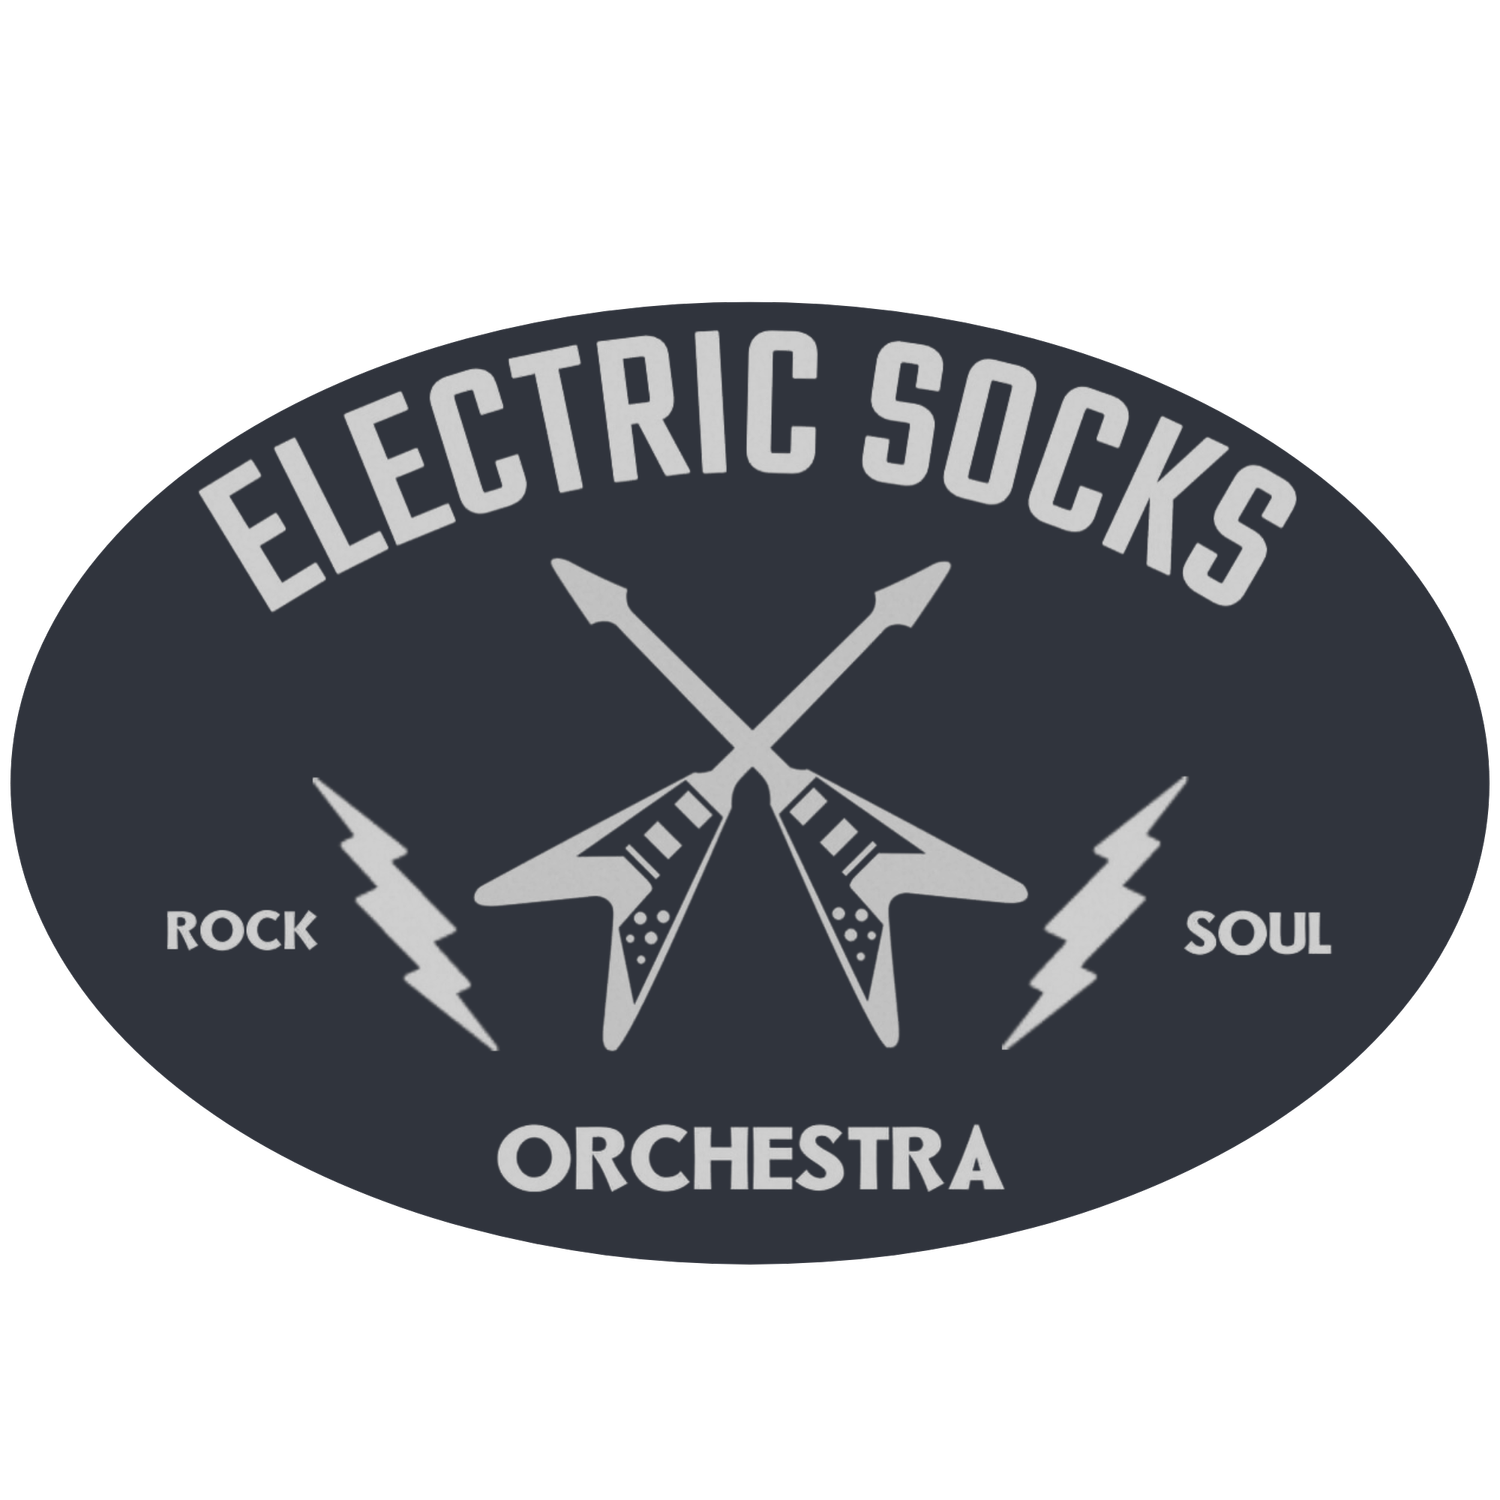 Electric Socks Orchestra